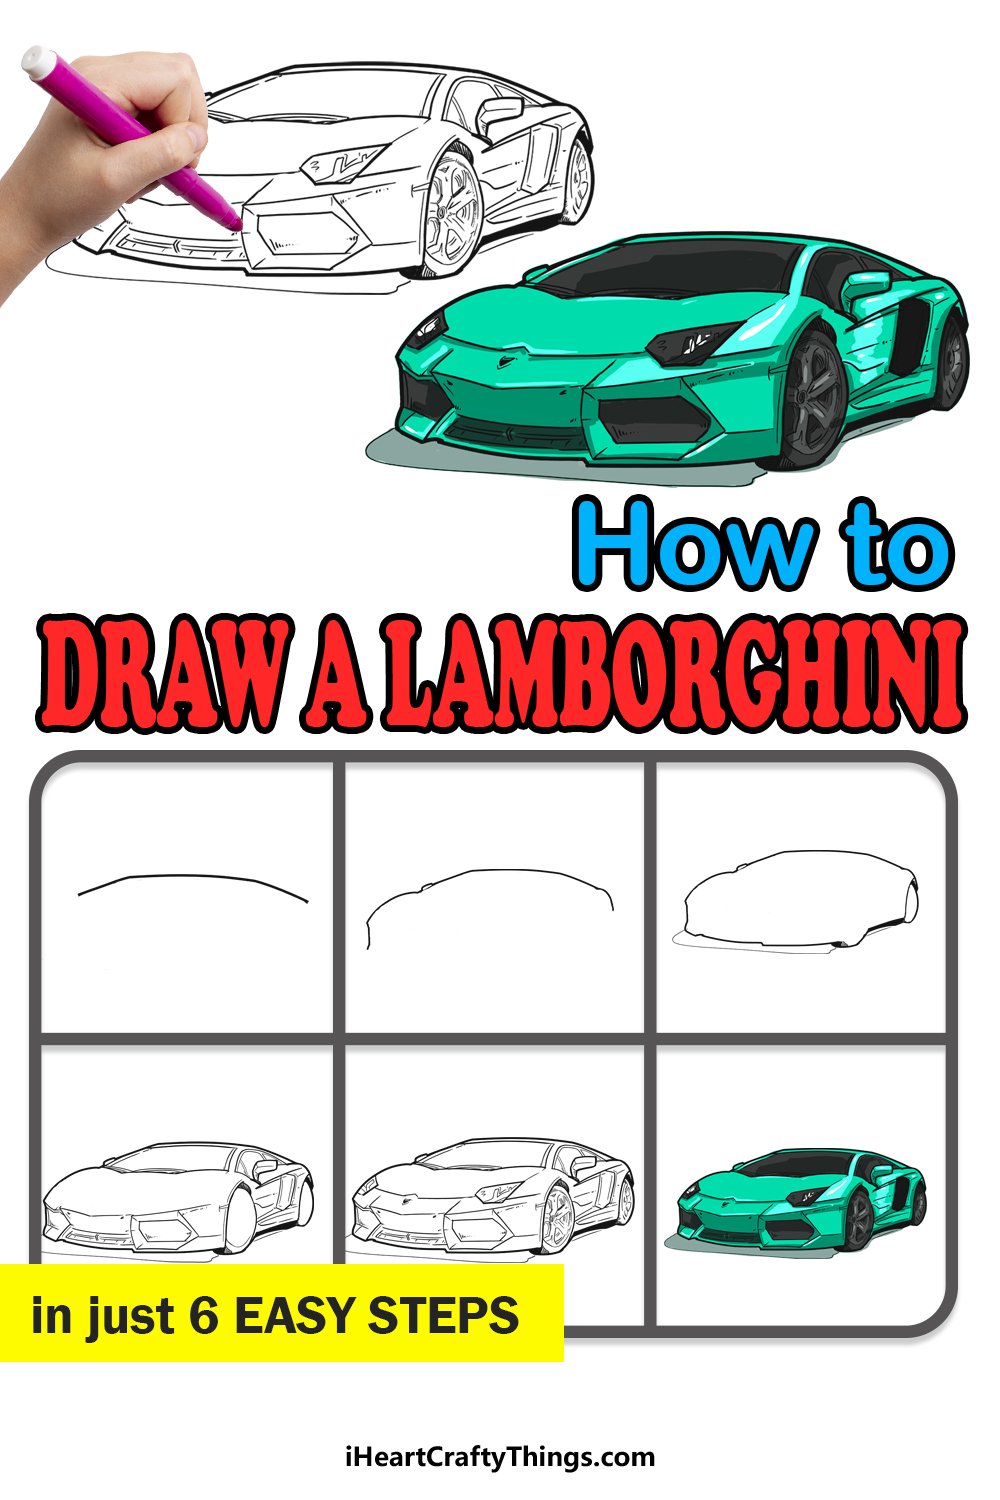 How to Draw A Lamborghini step by step guide